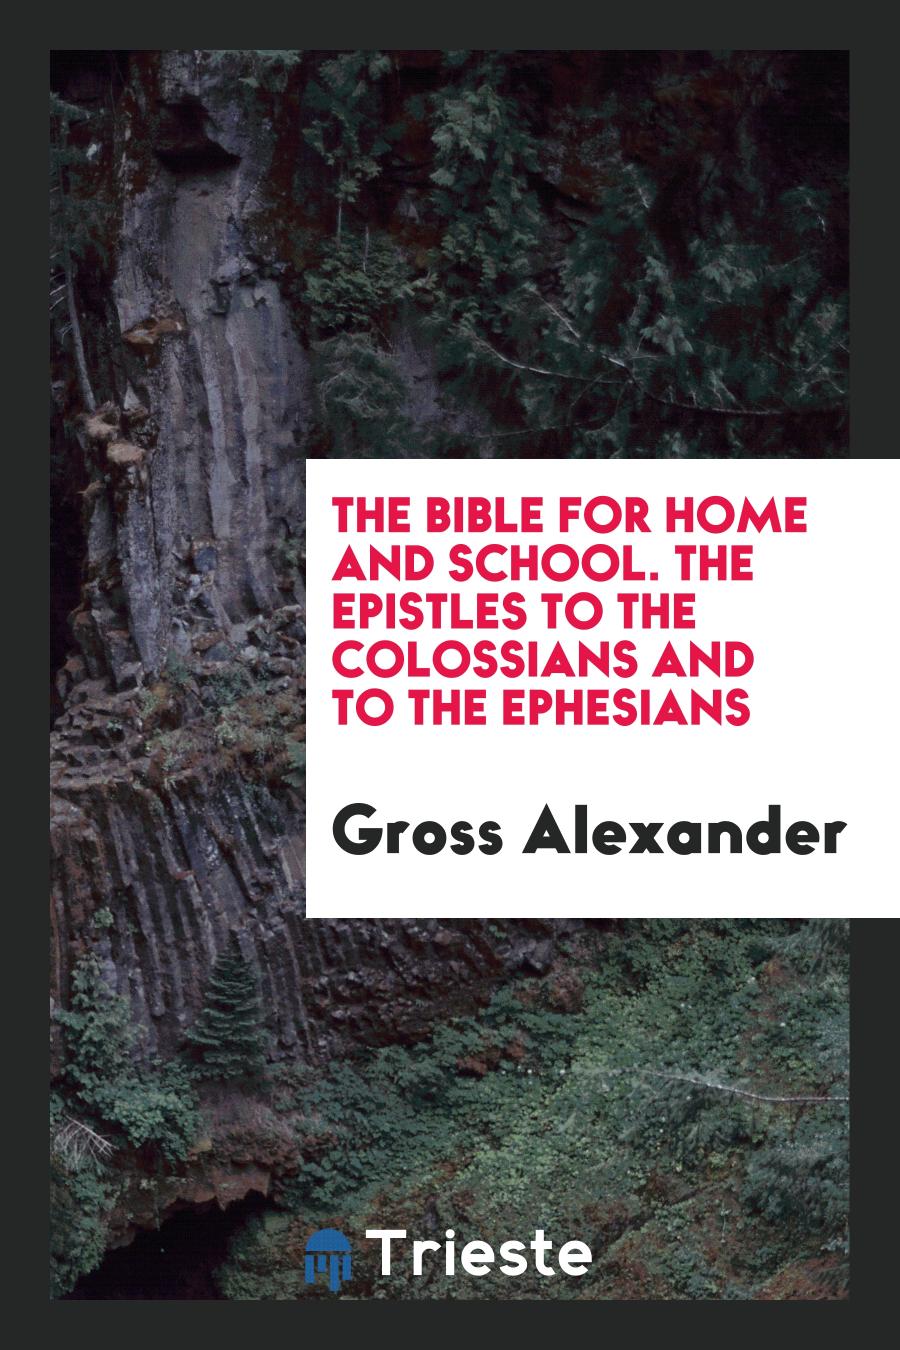 The Bible for Home and School. The Epistles to the Colossians and to the Ephesians